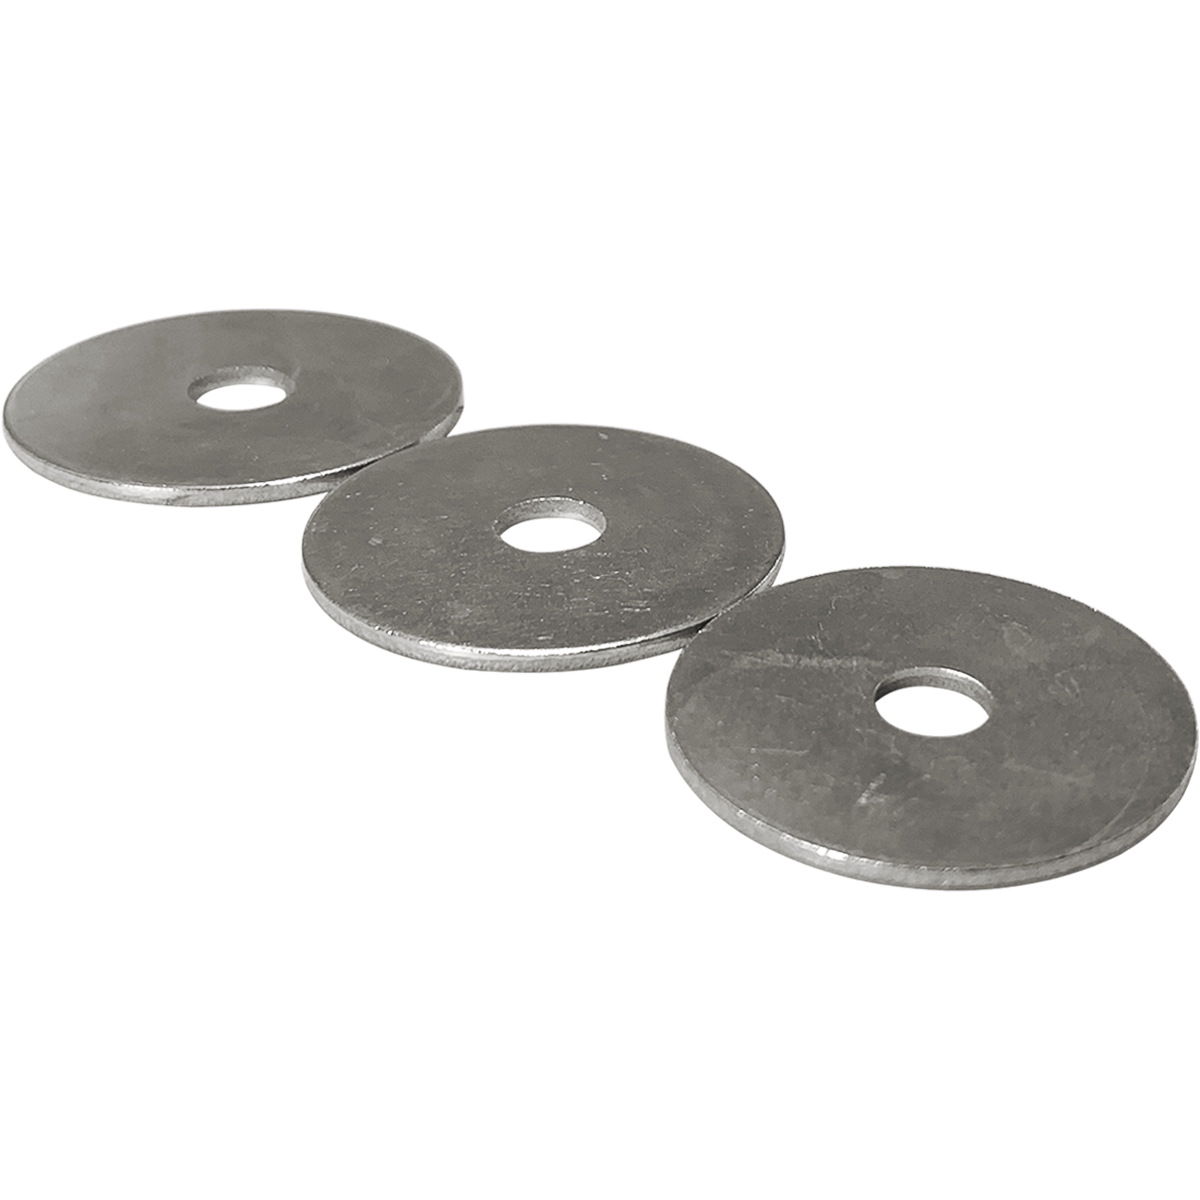 Corrosion resistant A2 stainless steel Penny Washers available in a broad selection of diameters and at competitive prices.